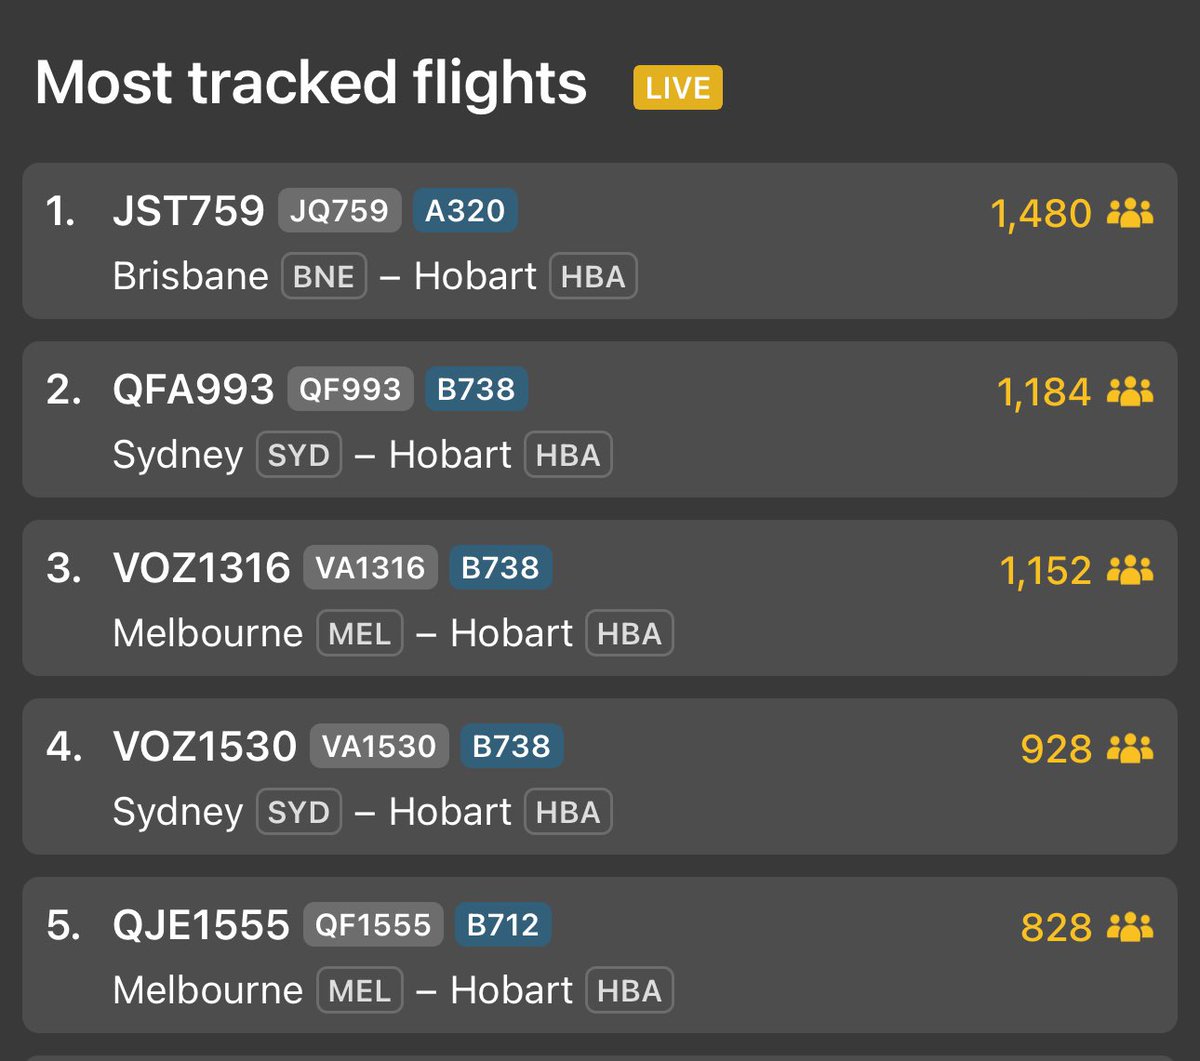 Lmao, the Hobart fog issues are becoming a top tier flight tracking event